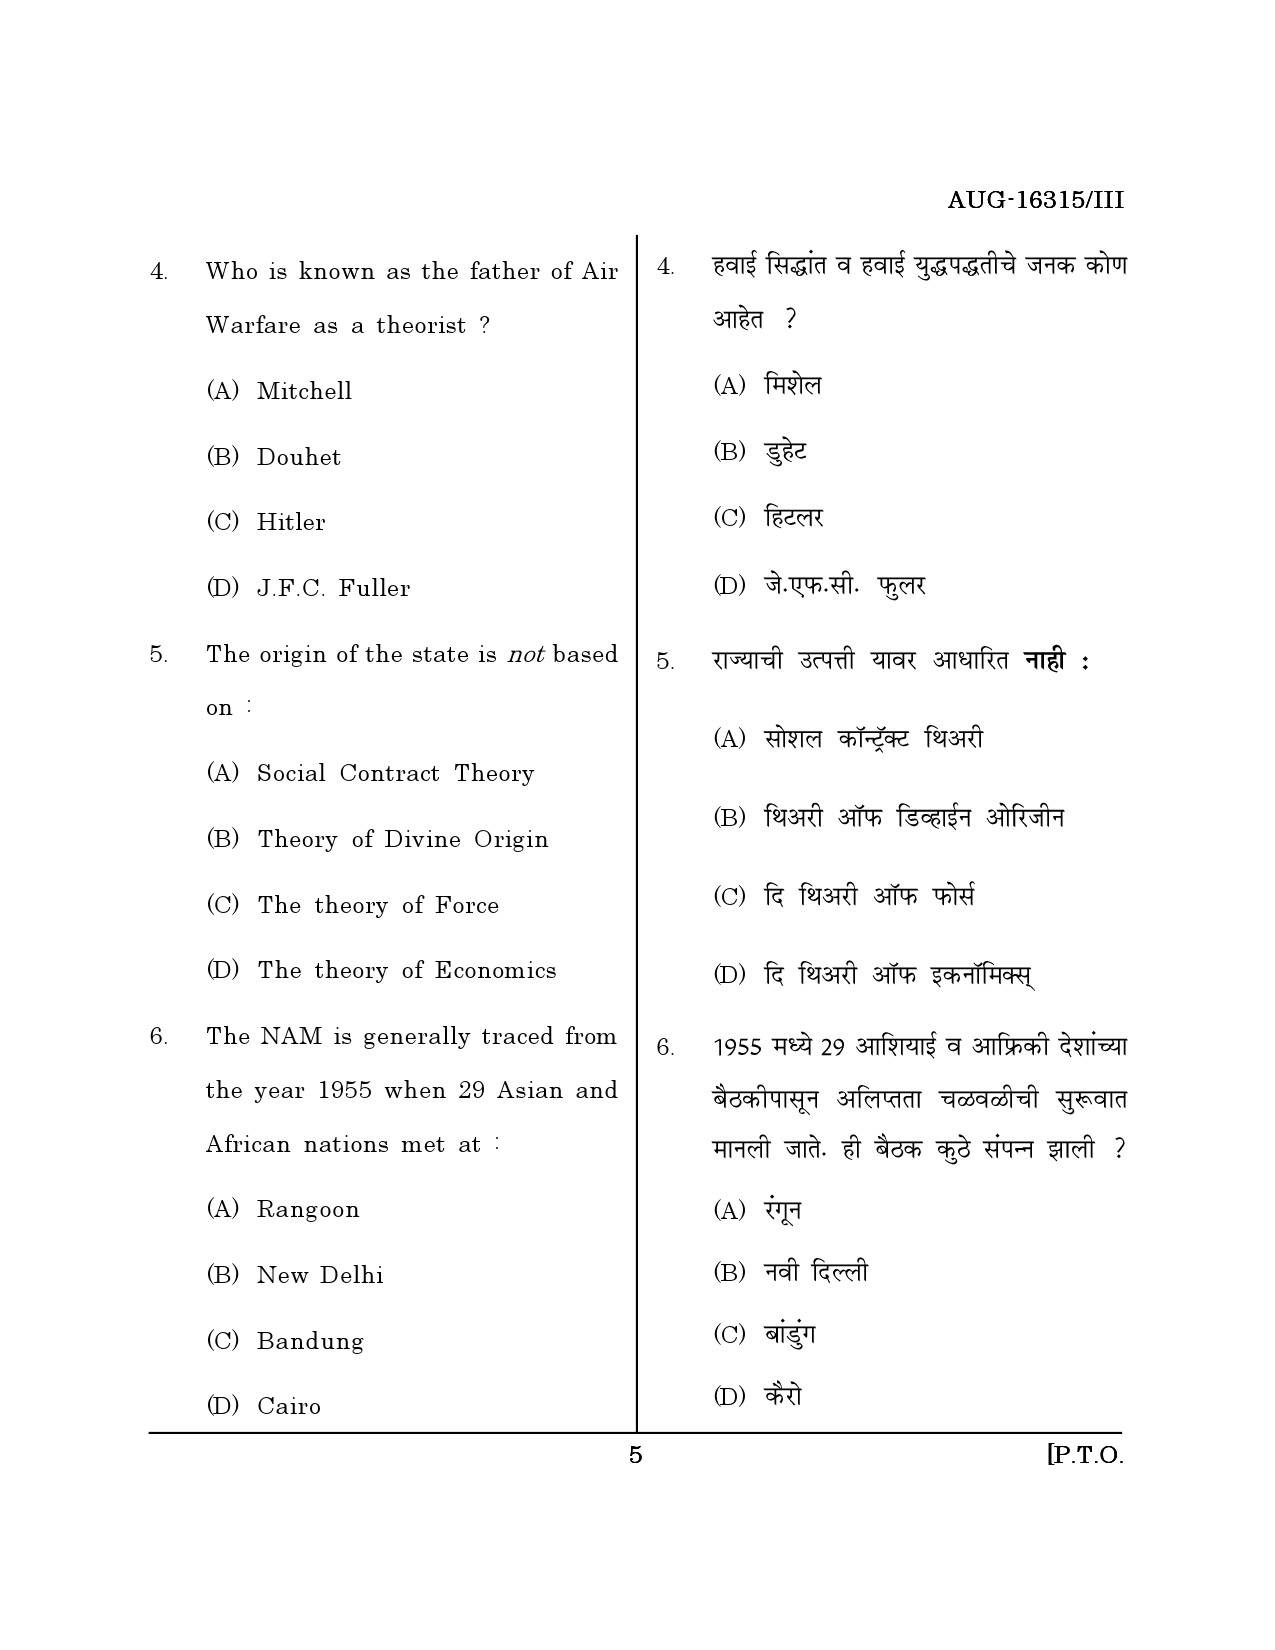 Maharashtra SET Defence and Strategic Studies Question Paper III August 2015 4